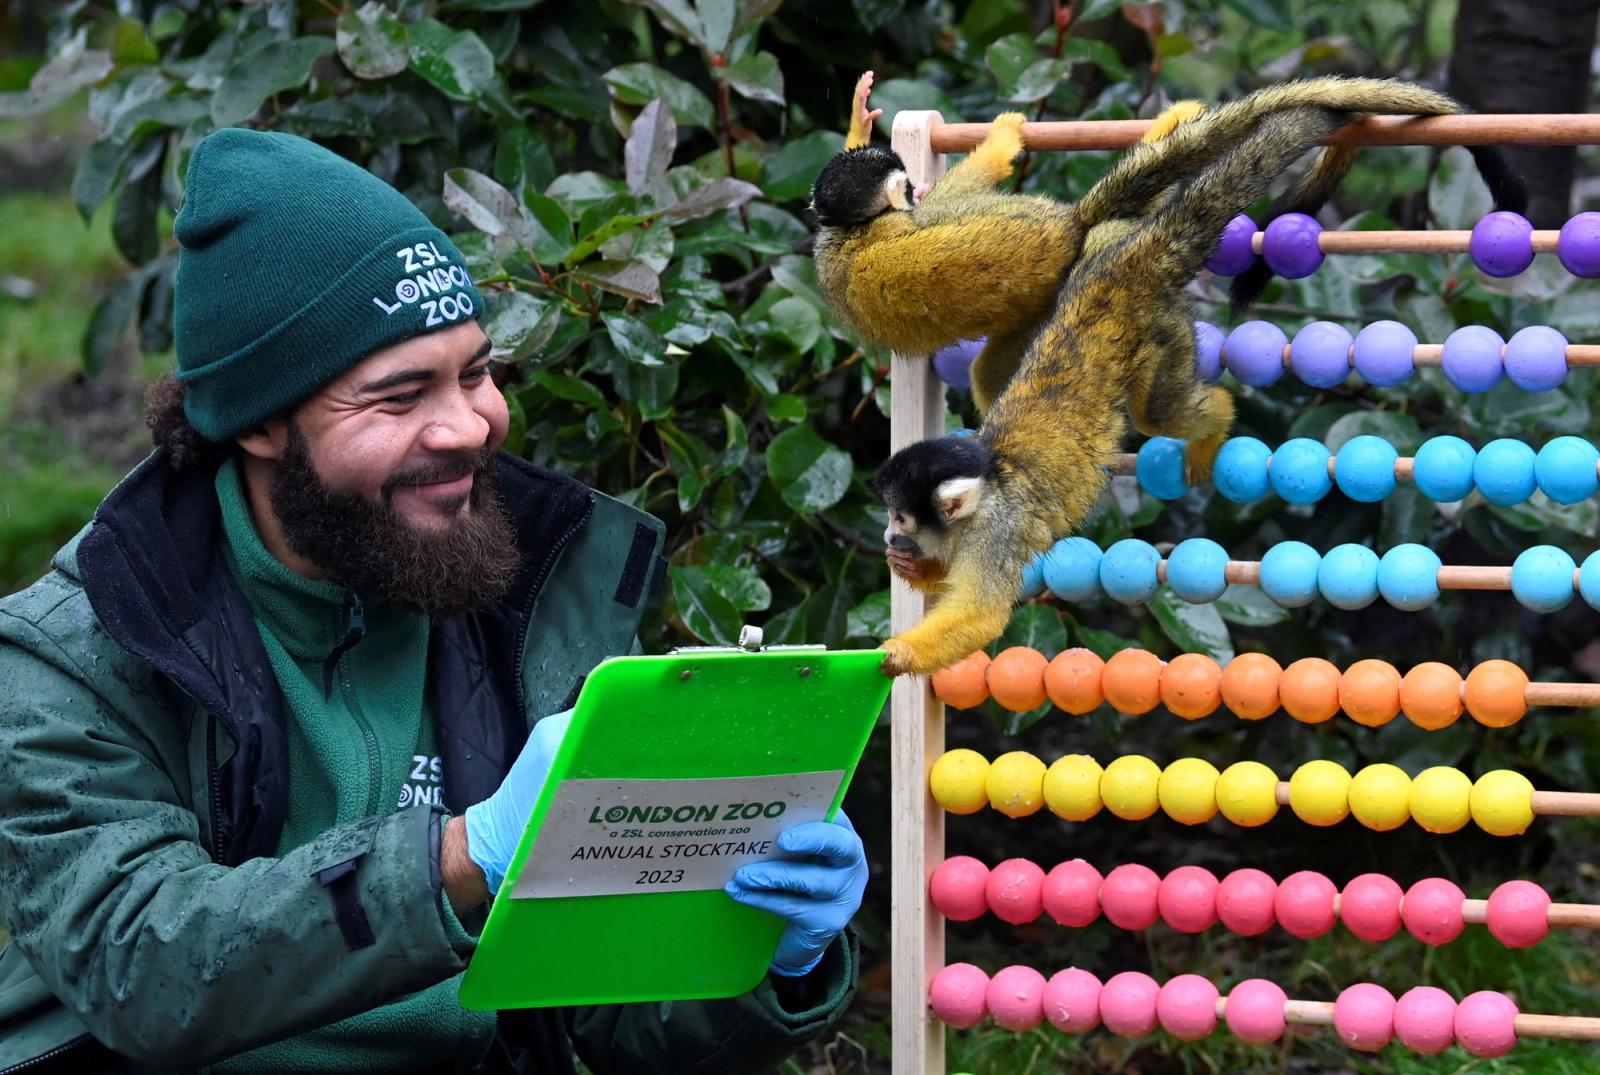 Keeper Andrew Dixon amongst squirrel monkeys during the annual stocktake at ZSL London Zoo on Jan. 3, 2023